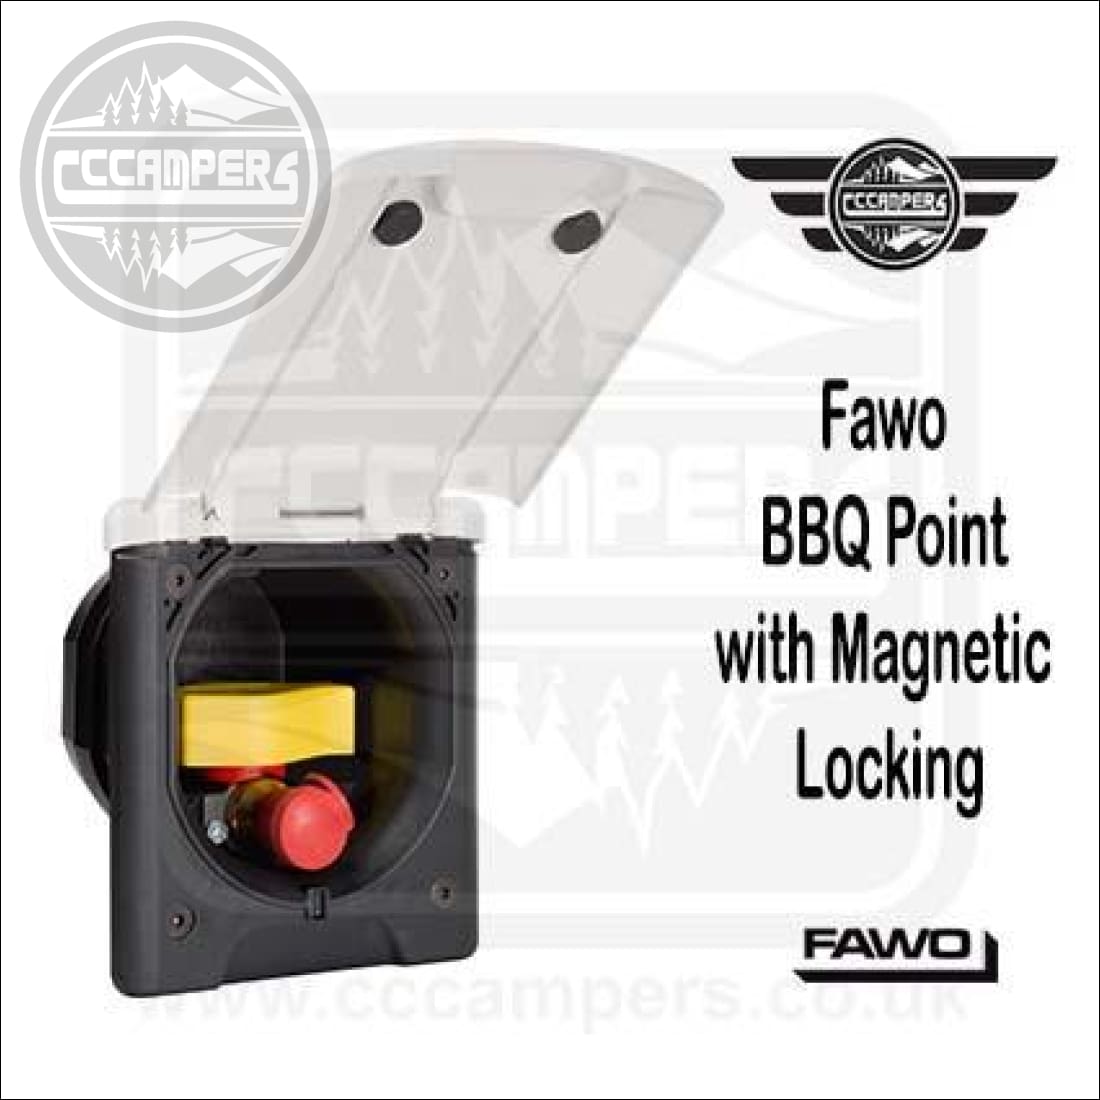 Fawo BBQ Point with Magnetic Locking - cccampers.myshopify.com